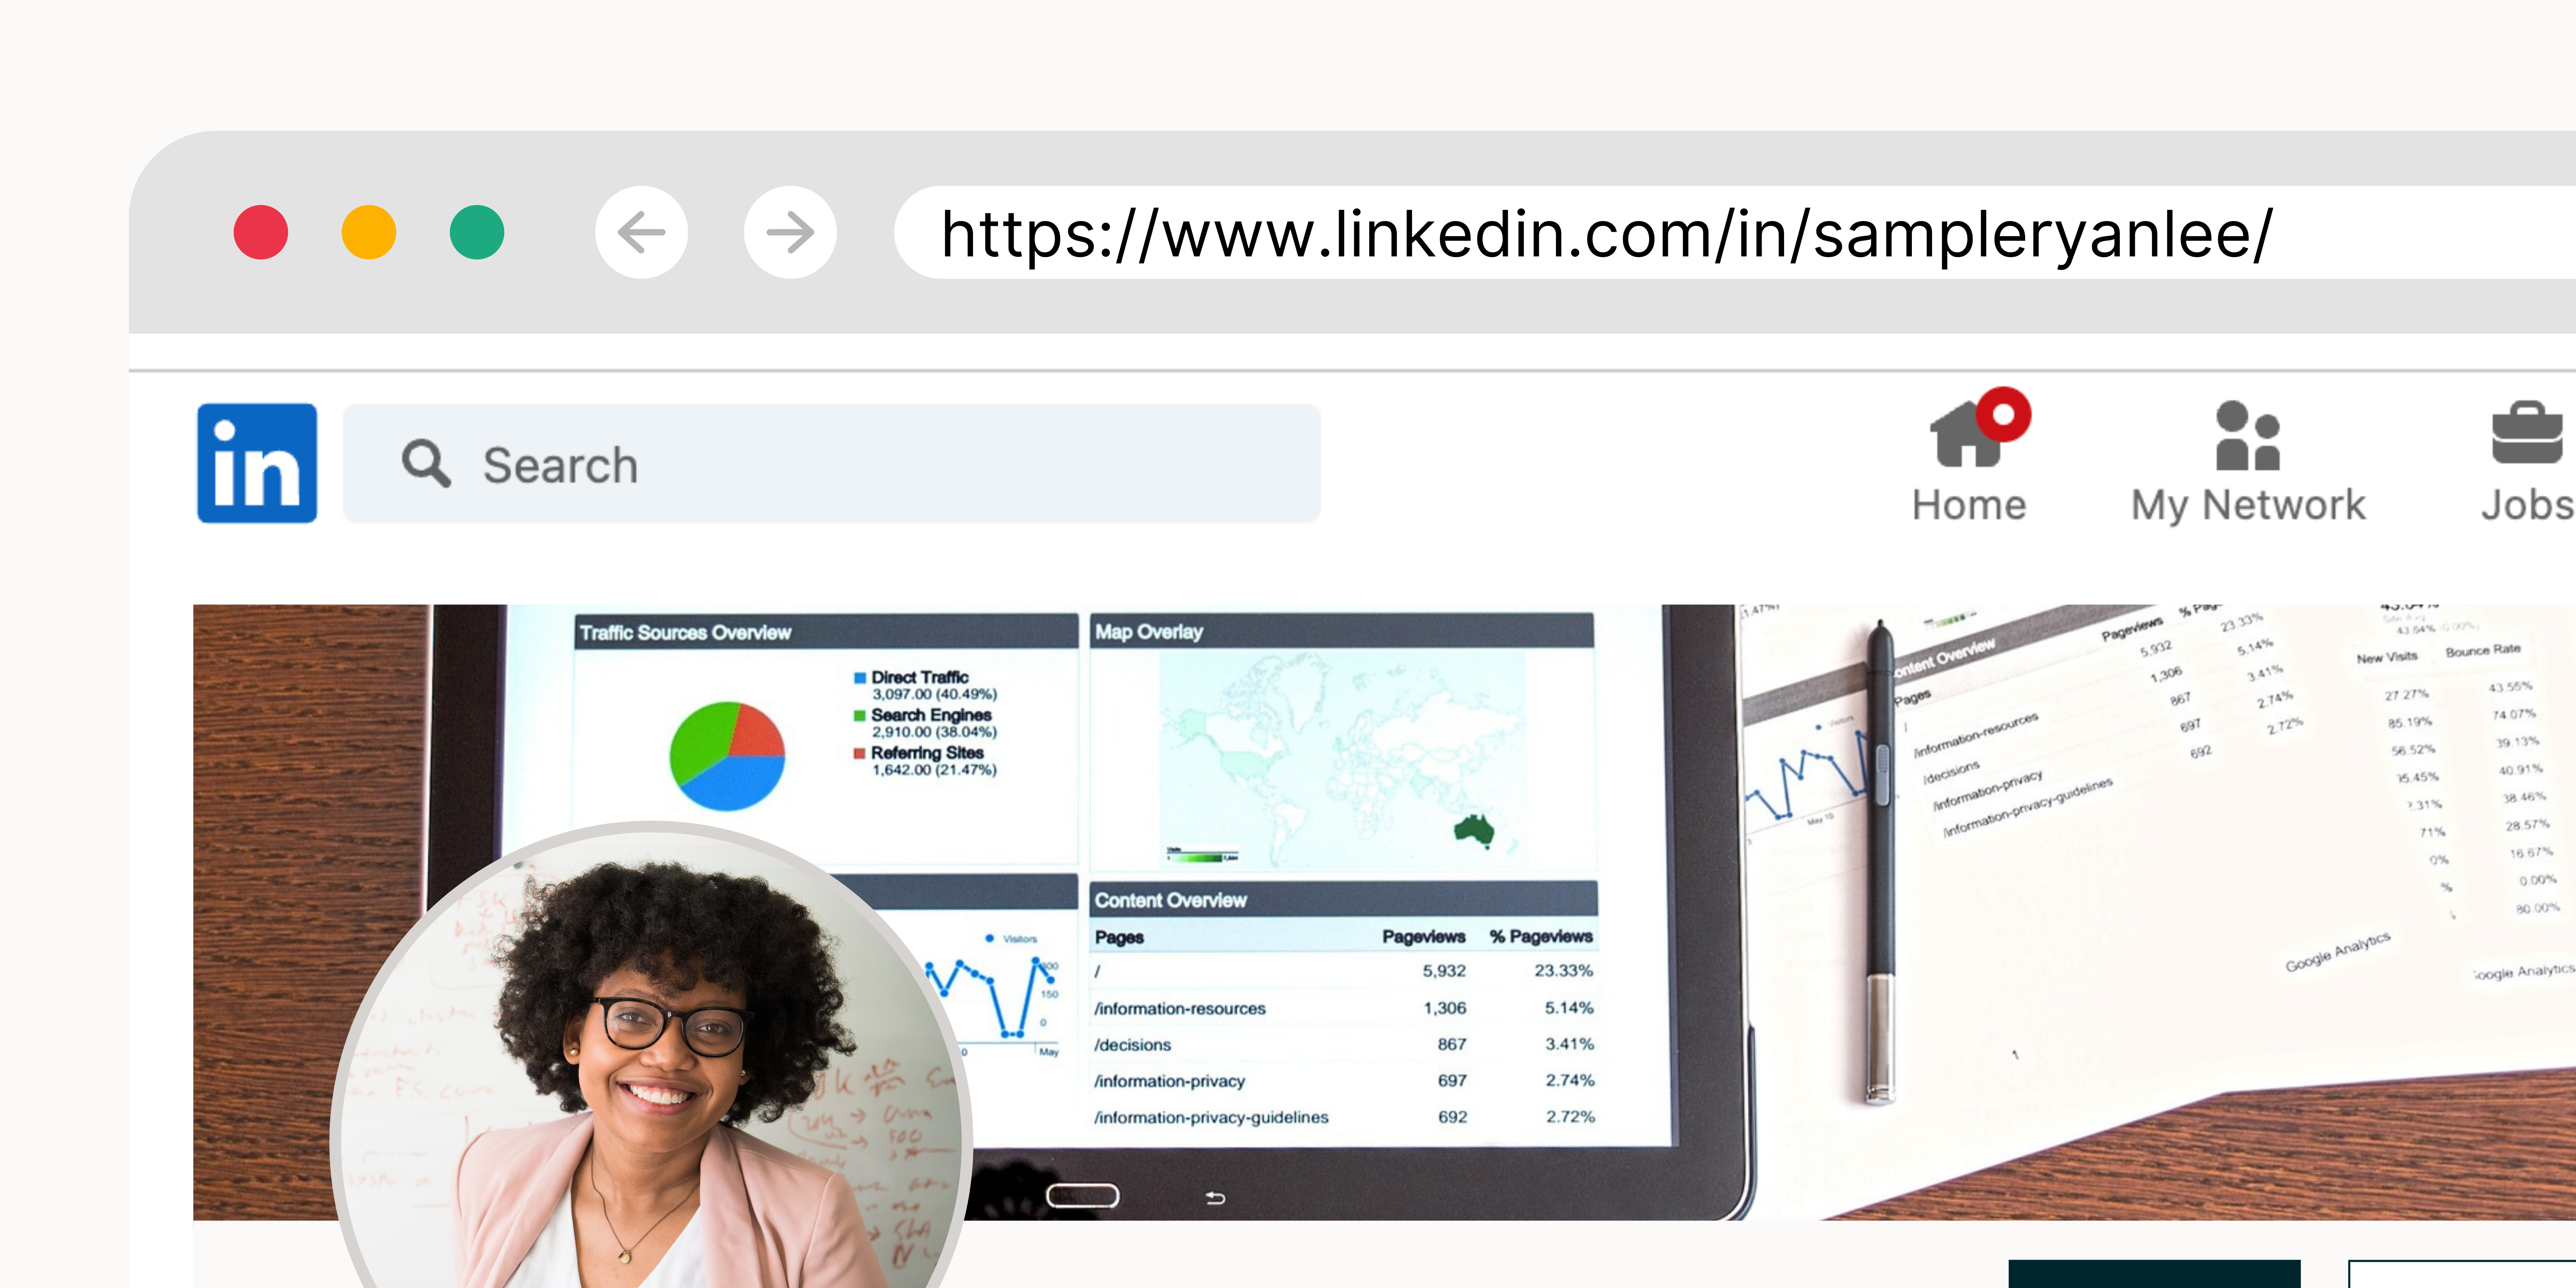 A screenshot of a LinkedIn profile page shows a URL customized to the user's name.